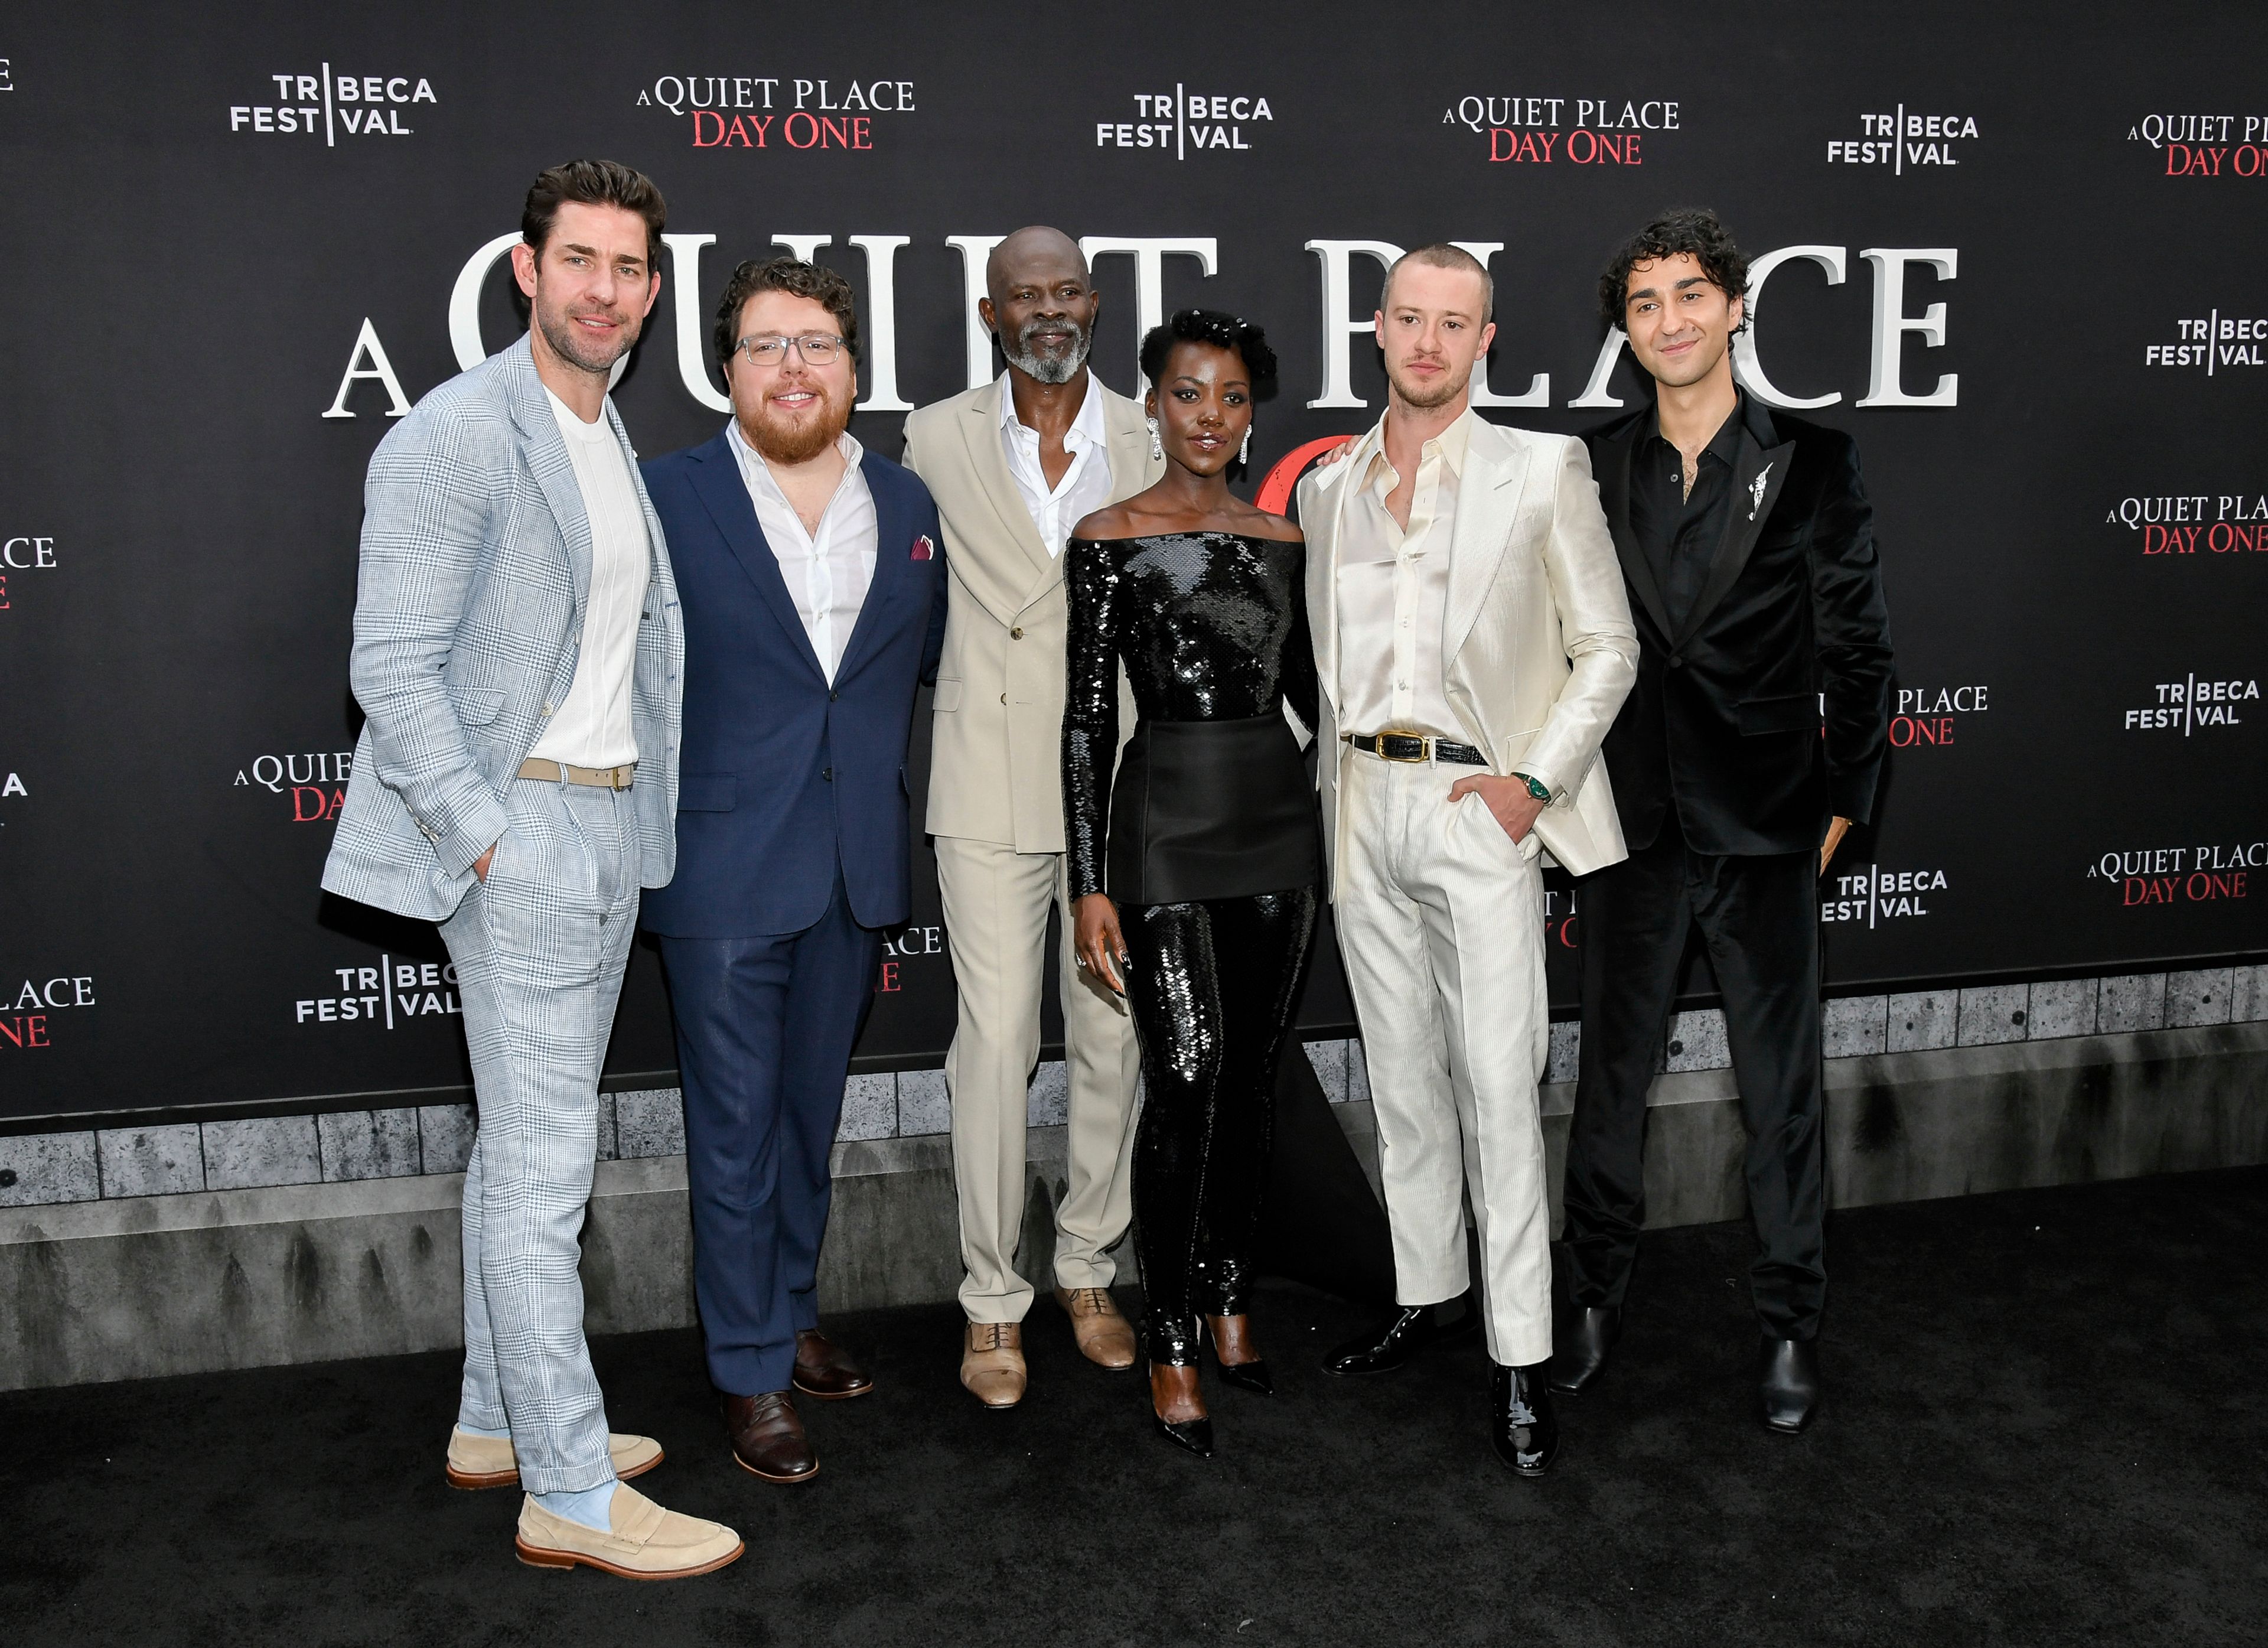 John Krasinski, from left, Michael Sarnoski, Djimon Hounsou, Lupita Nyong'o, Joseph Quinn and Alex Wolff attend the Paramount Pictures premiere of "A Quiet Place: Day One" at AMC Lincoln Square on Wednesday, June 26, 2024, in New York. (Photo by Evan Agostini/Invision/AP)